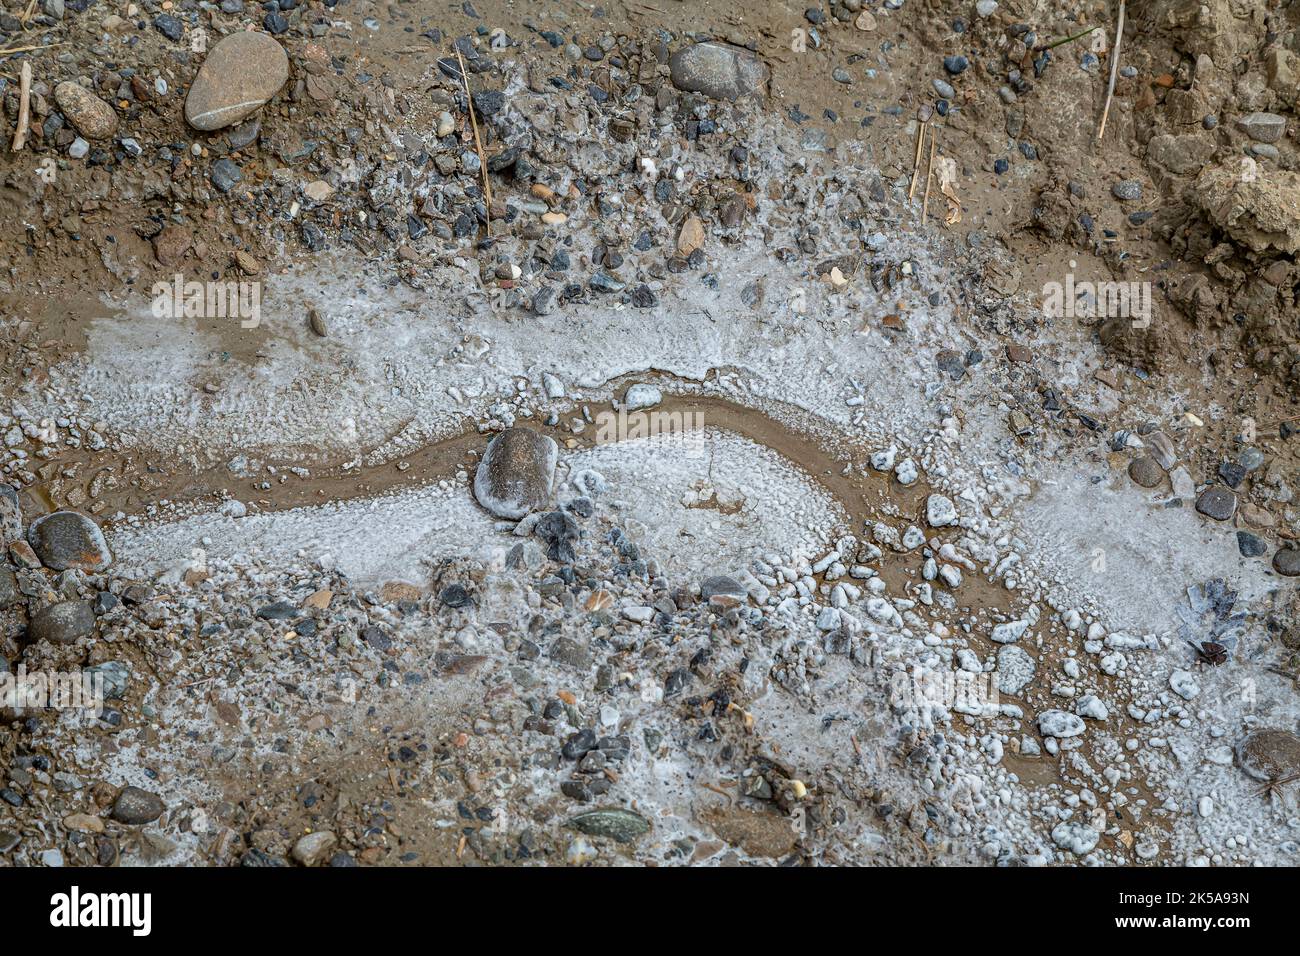 Crystallized salt deposition in the Praid Canyon on June 19, 2021 in Praid, Harghita. Stock Photo